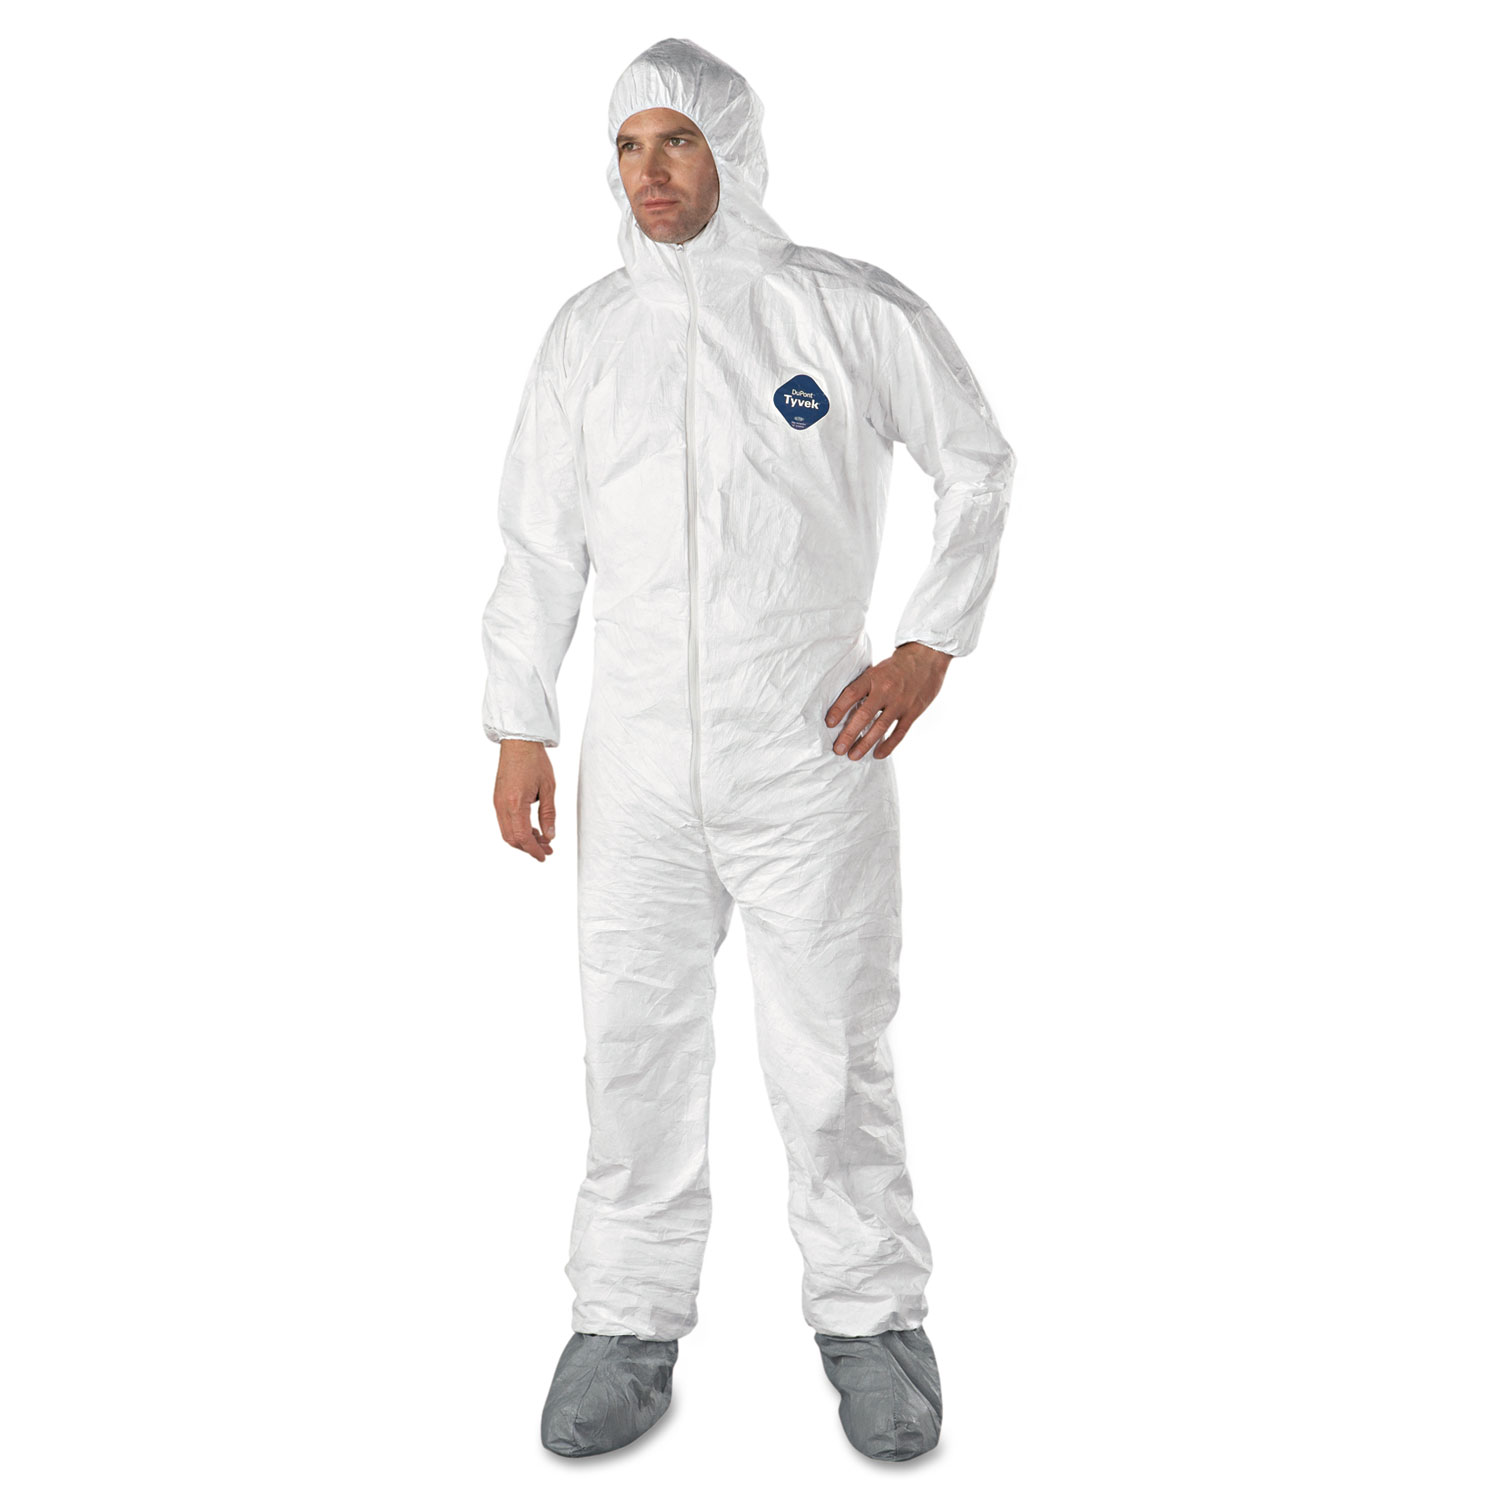  DuPont TY122SWHLG002500 Tyvek Elastic-Cuff Hooded Coveralls w/Boots, White, Large, 25/Carton (DUPTY122SL) 